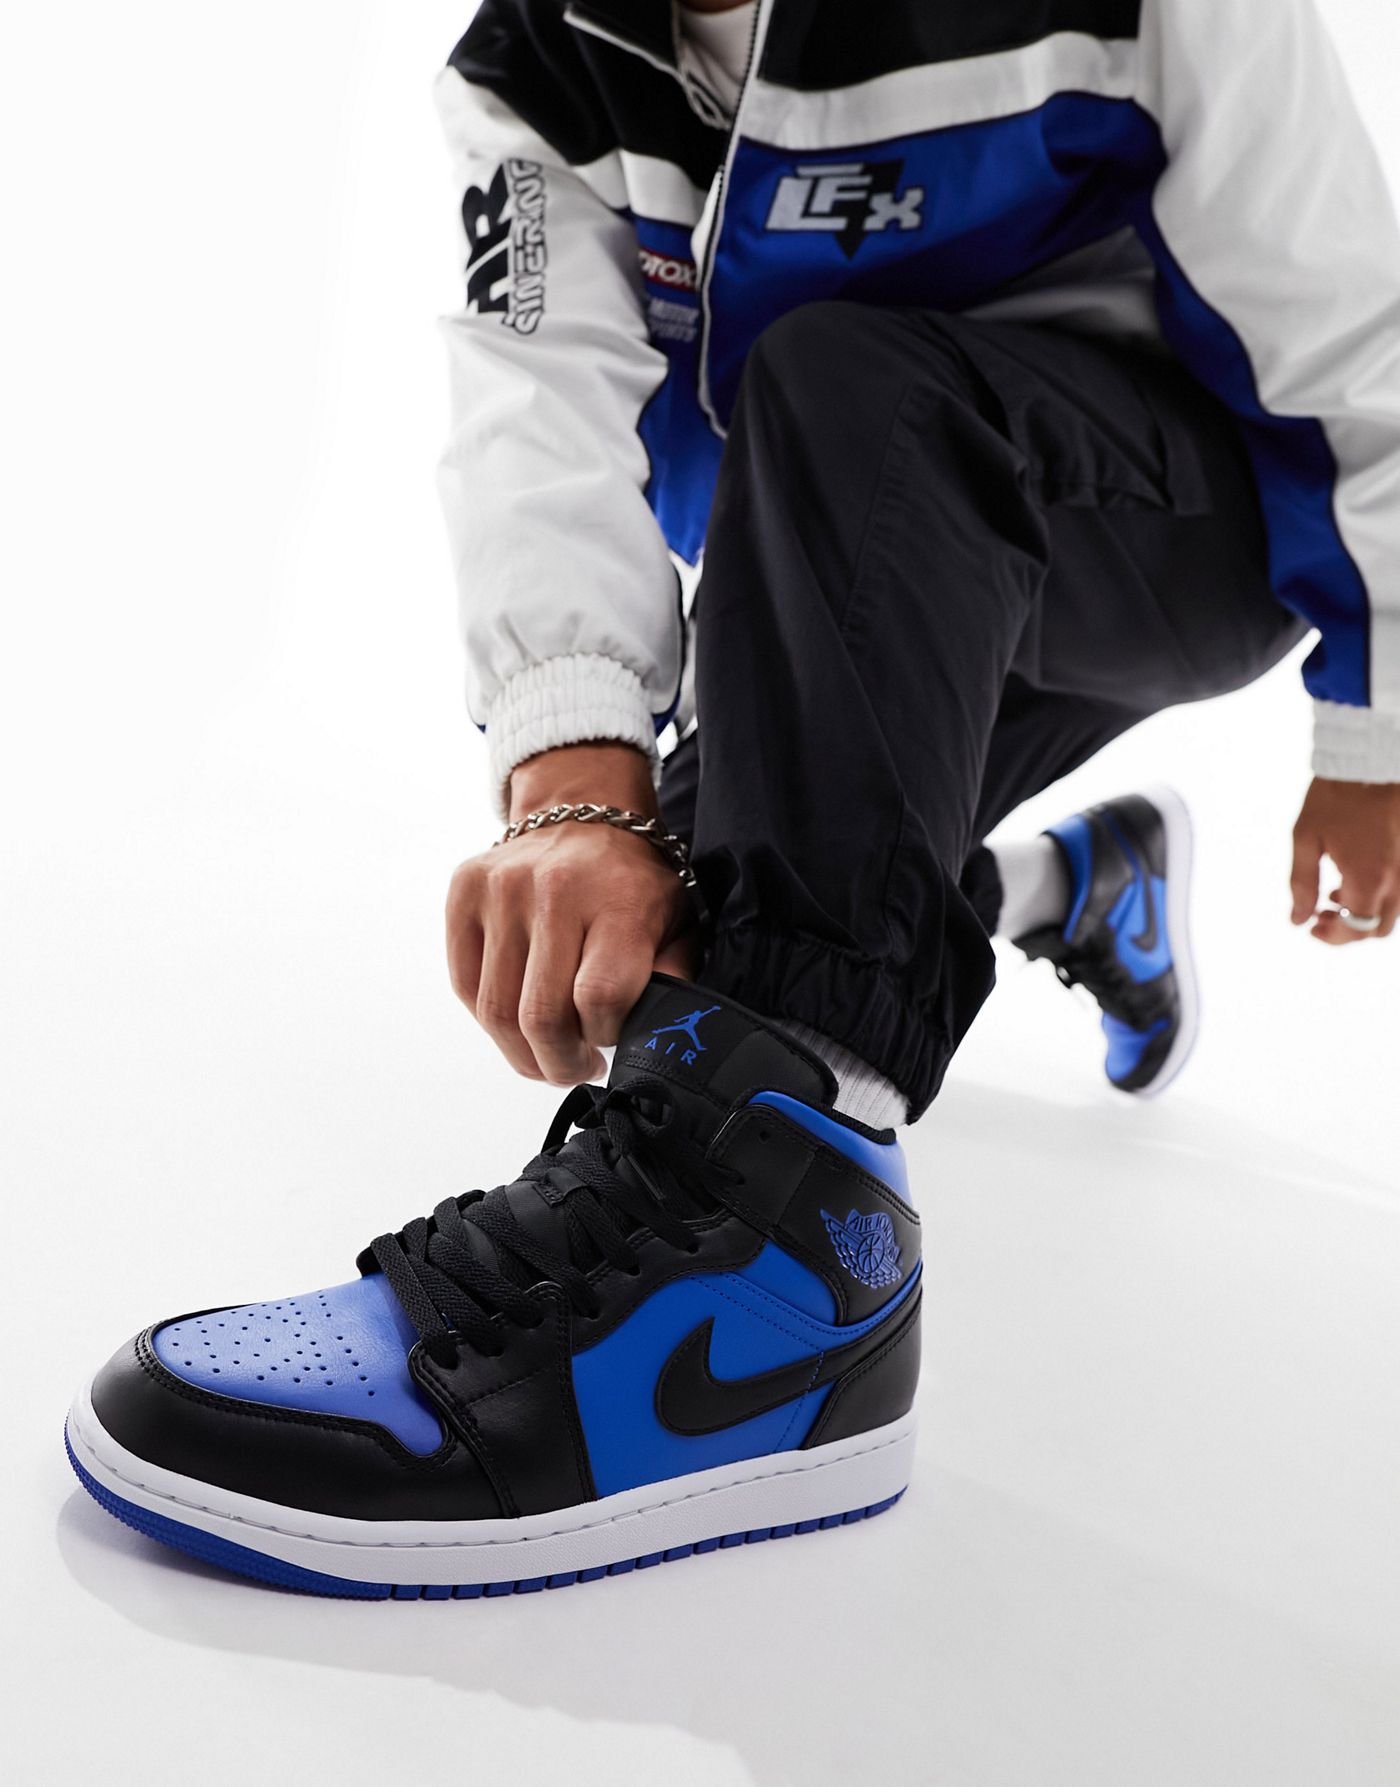 Air Jordan 1 Mid trainers in royal blue and black 